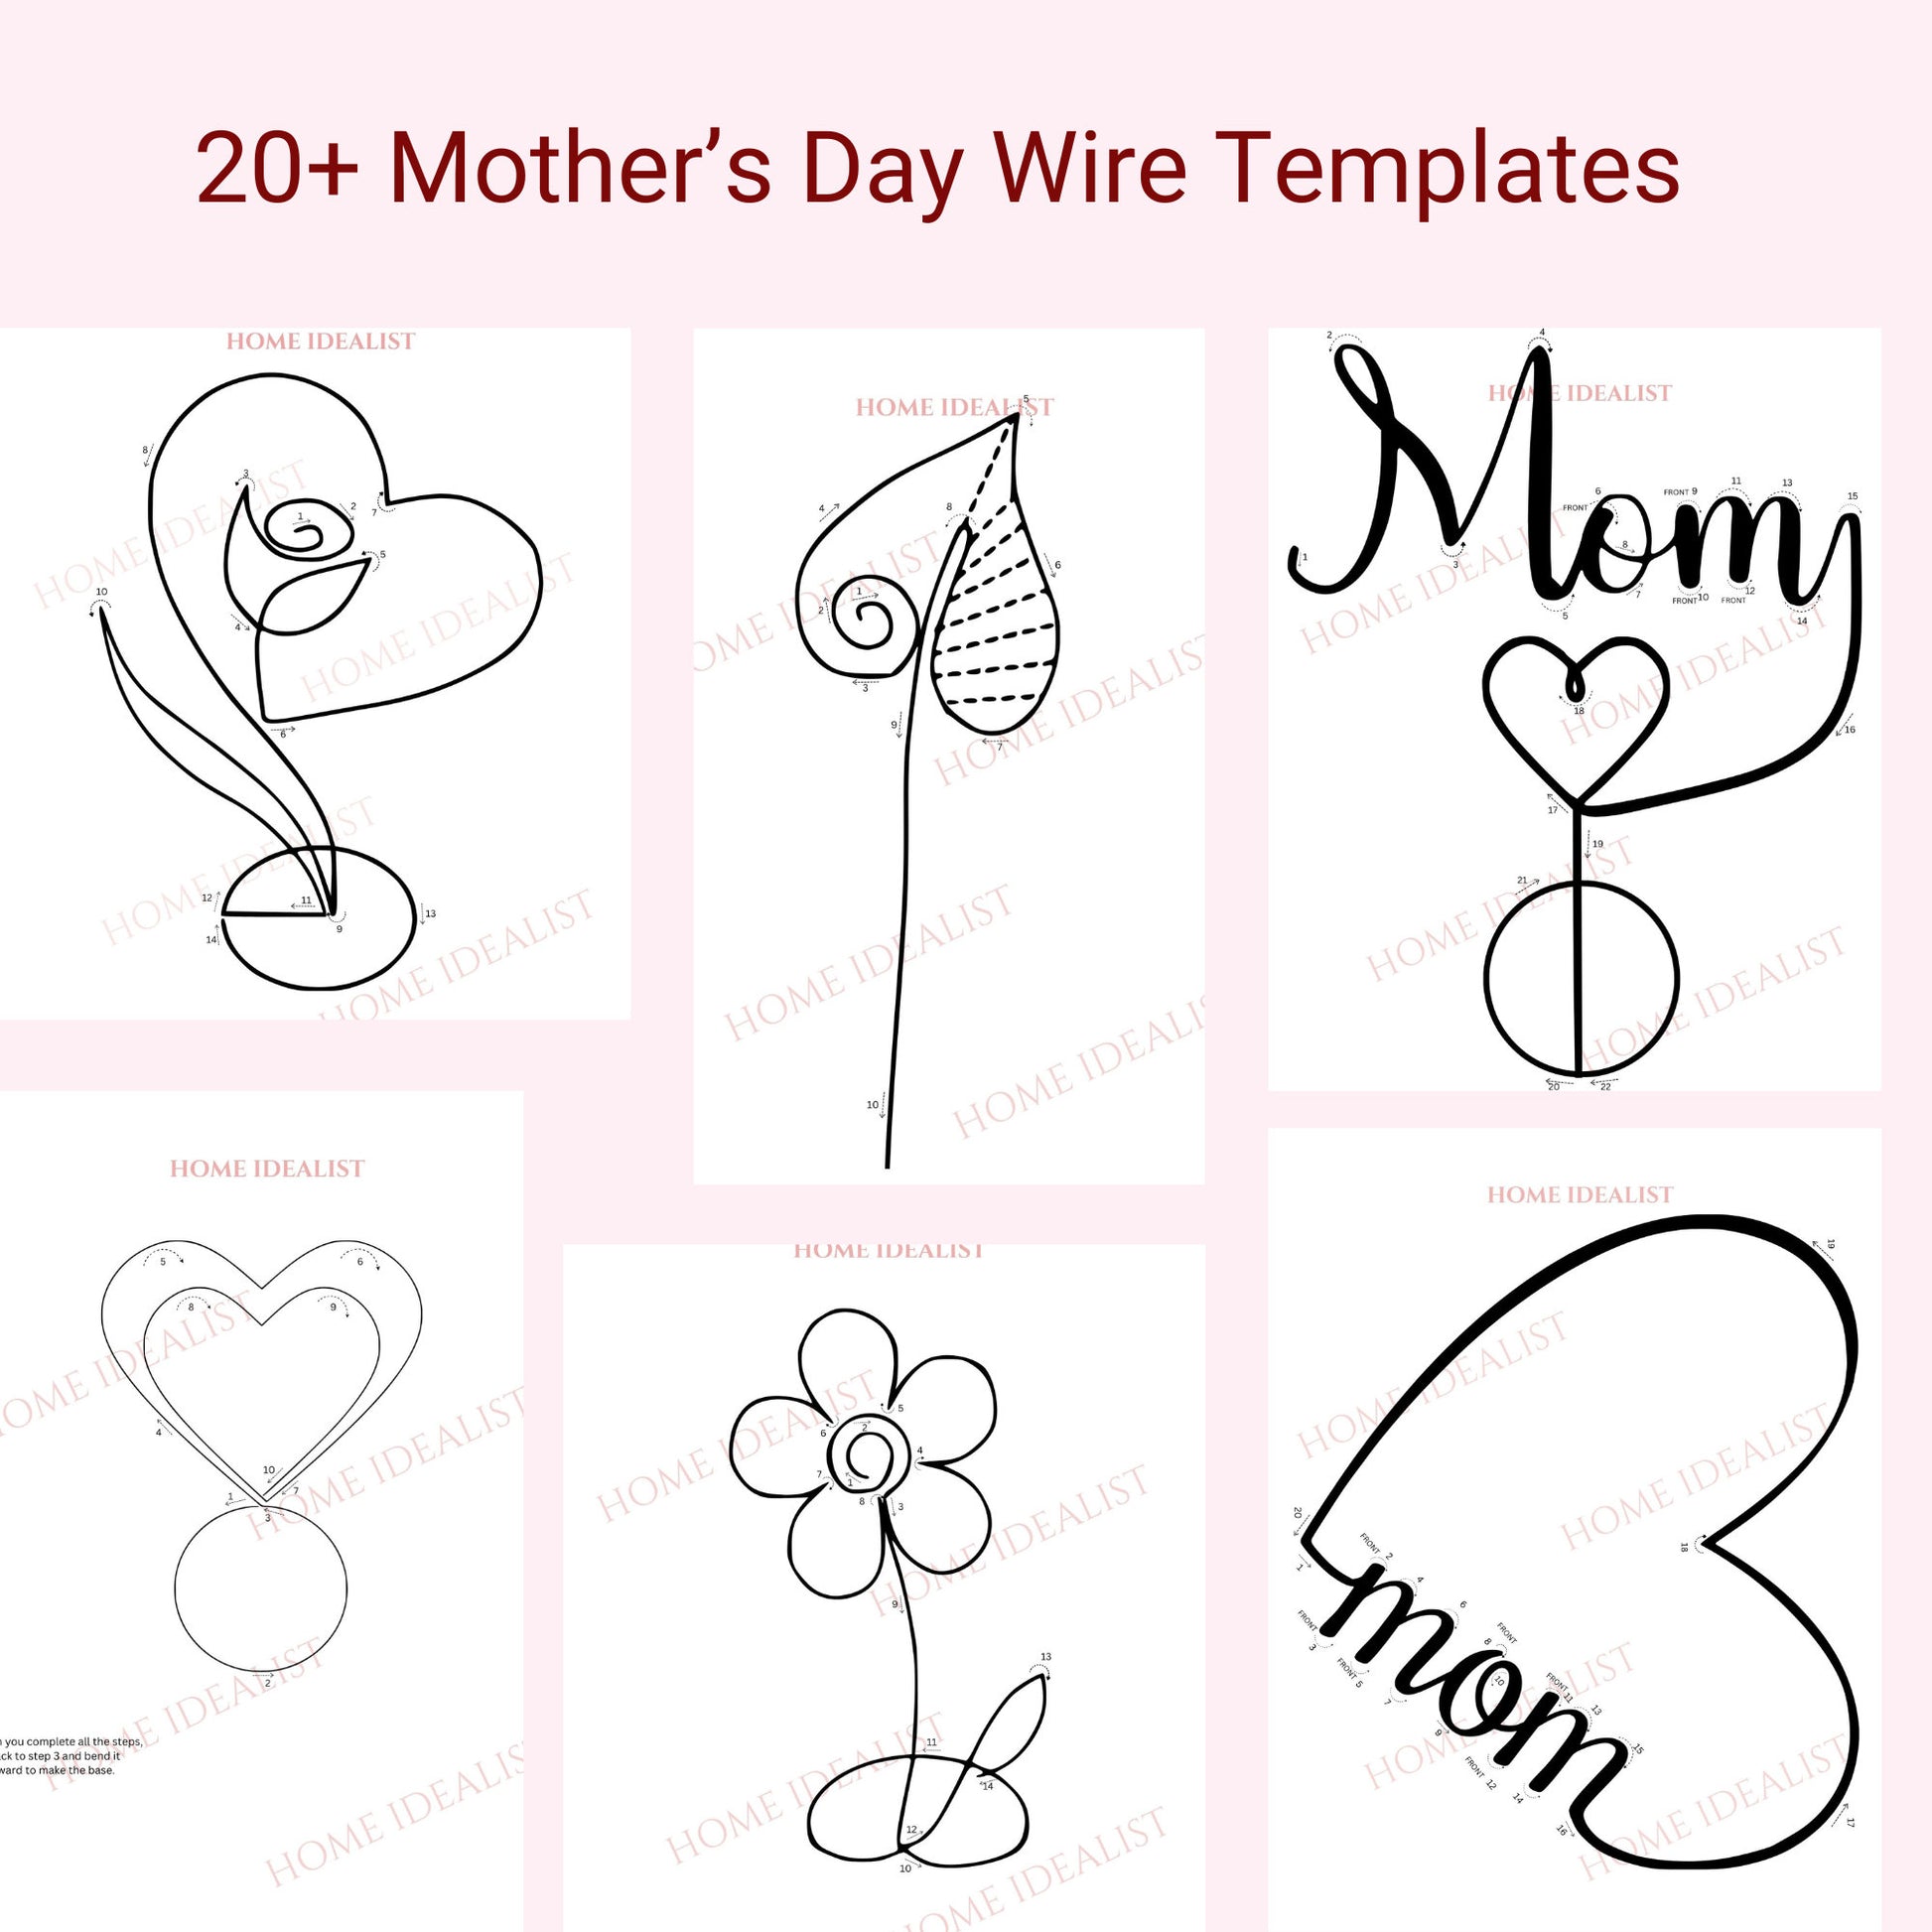 20+ Mother's Day Knitted Wire Patterns Bundle. Printable Templates for Knitted Wire. Tricotin Art. Instant Digital Download.